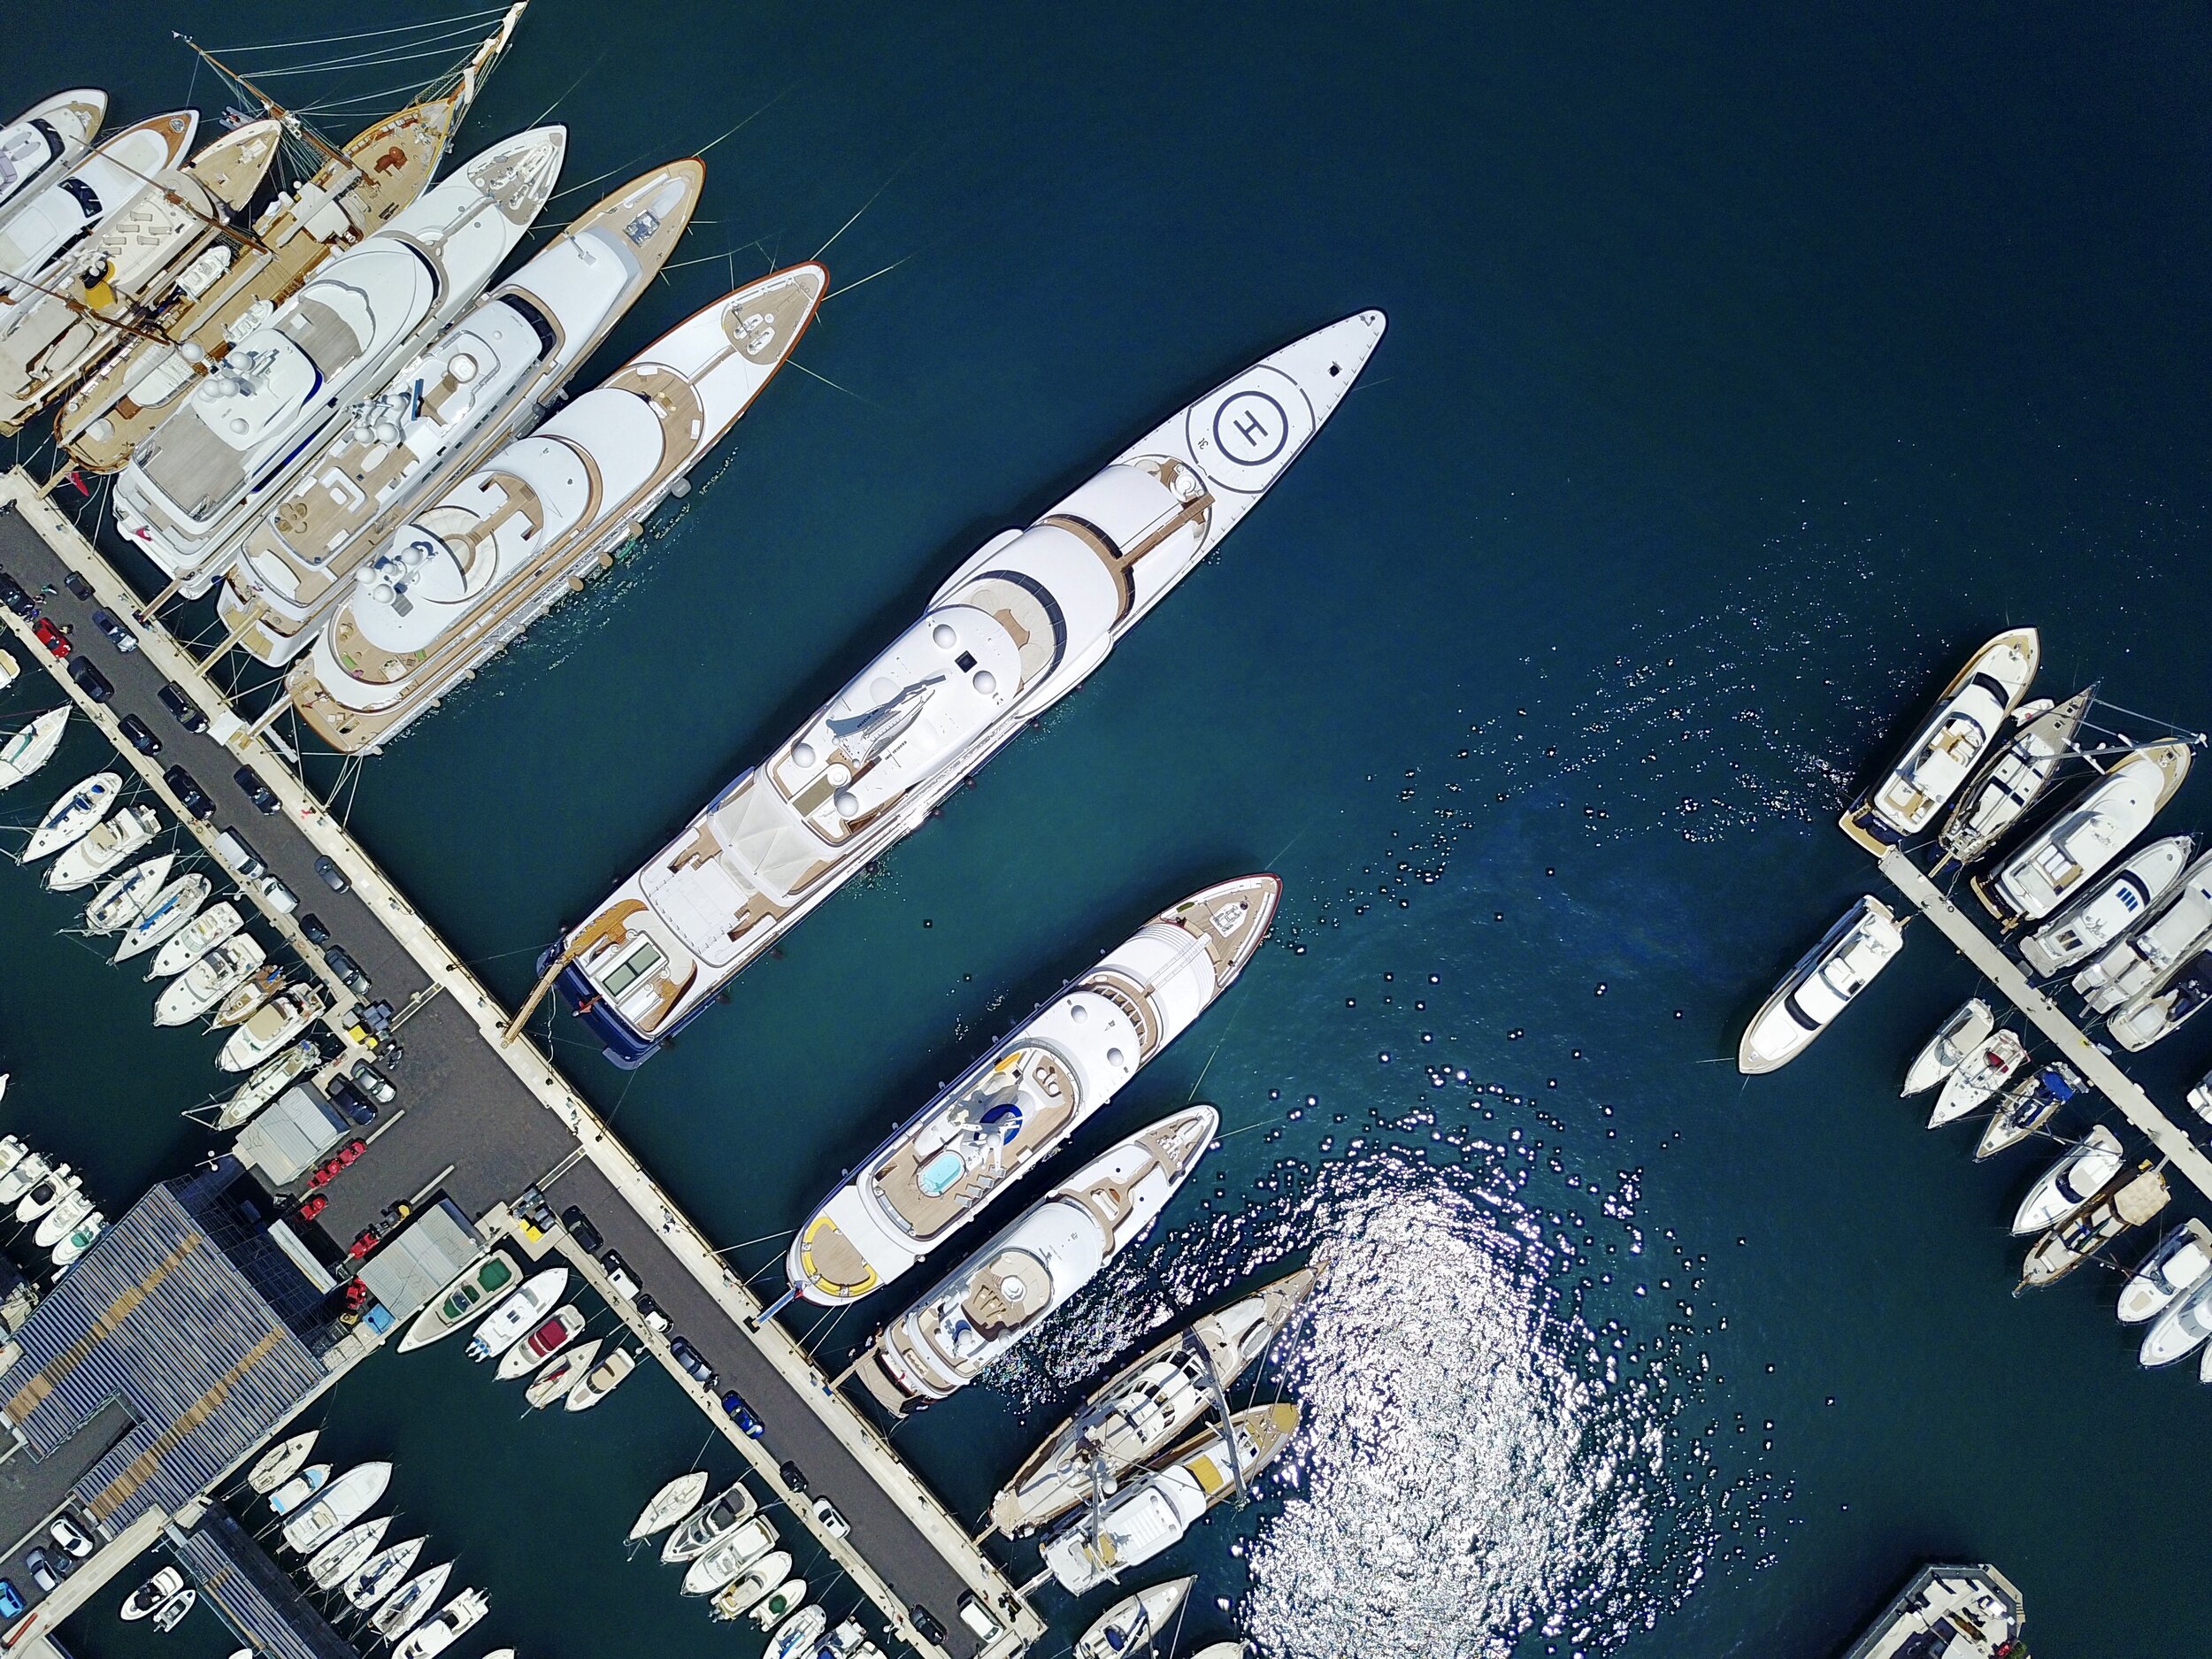 Aerial-view-of-super-yachts-in-harbor-on-the-Mediterranean-coast-1013798416_4000x3000.jpeg